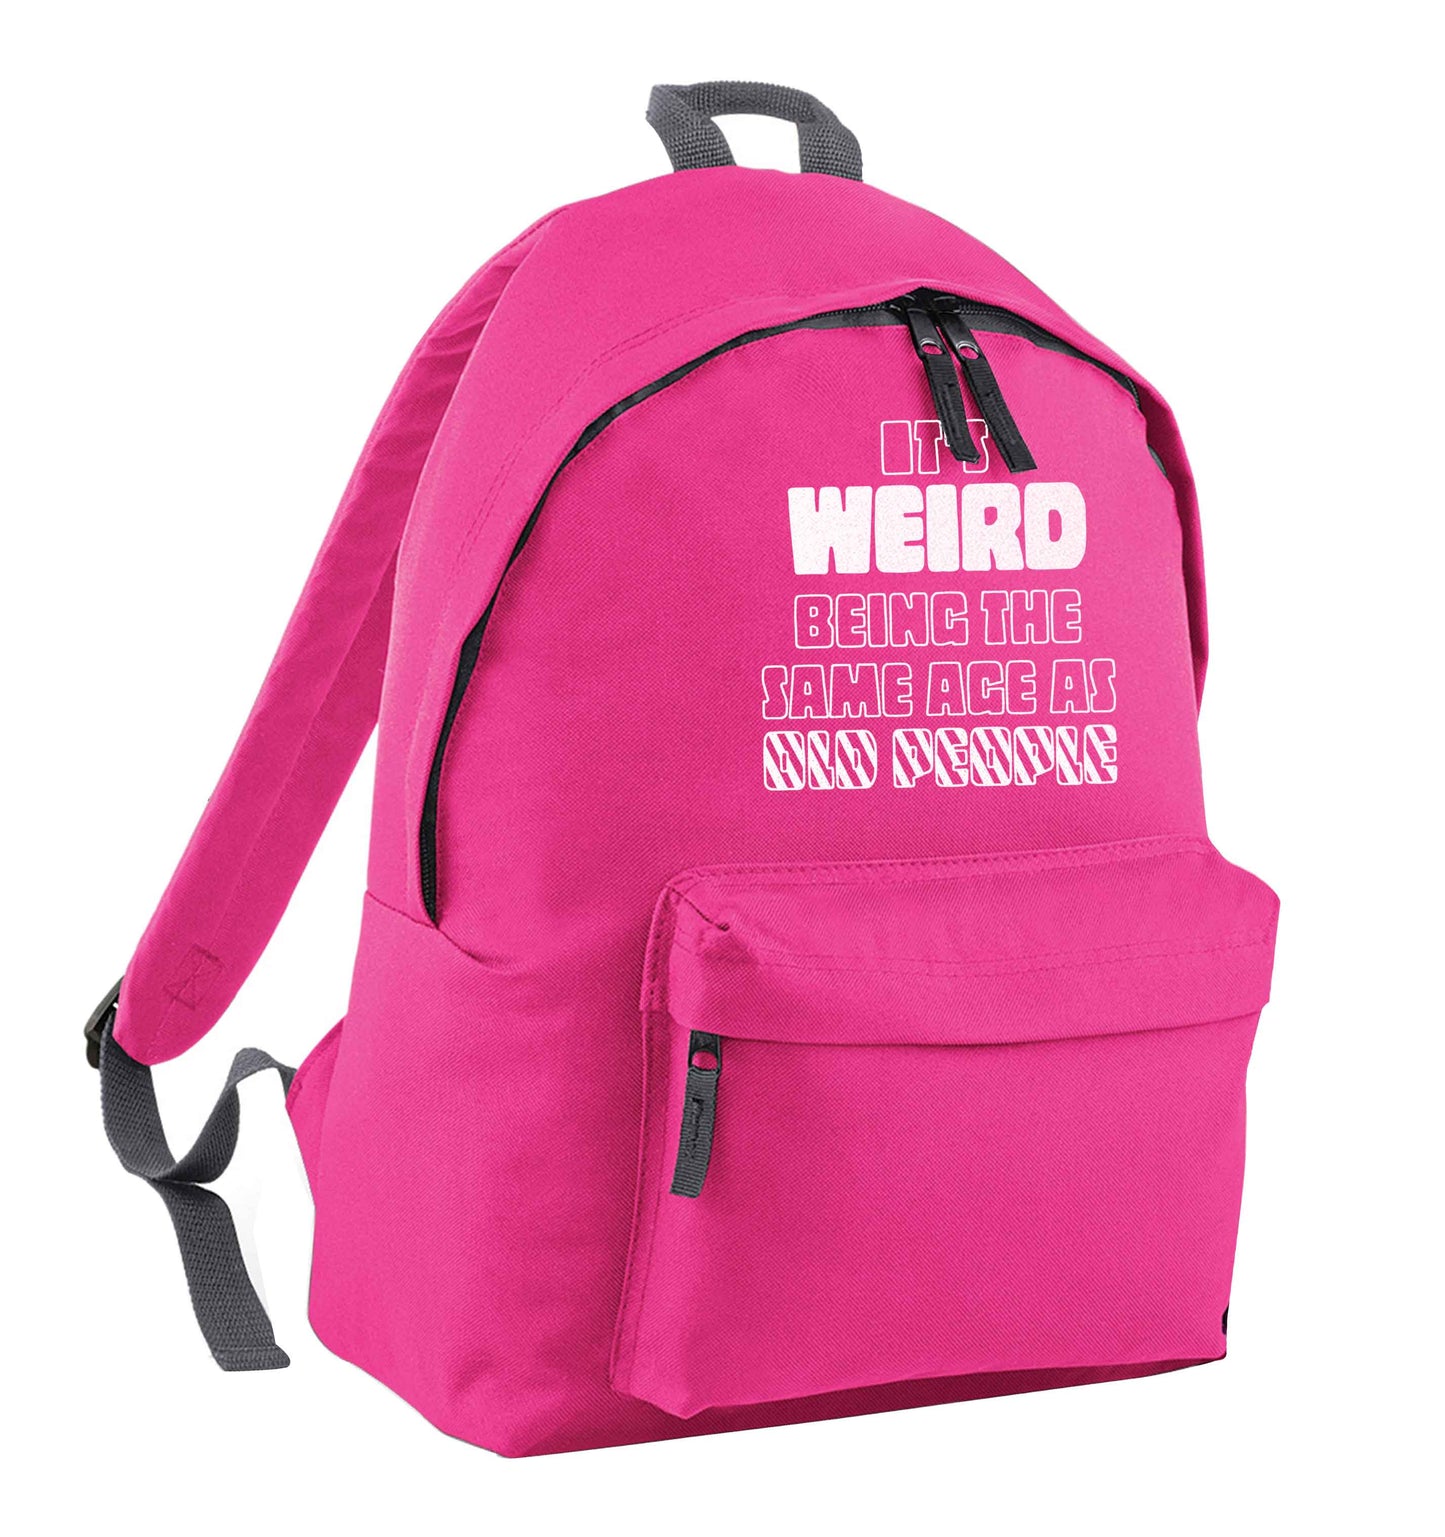 It's weird being the same age as old people pink adults backpack